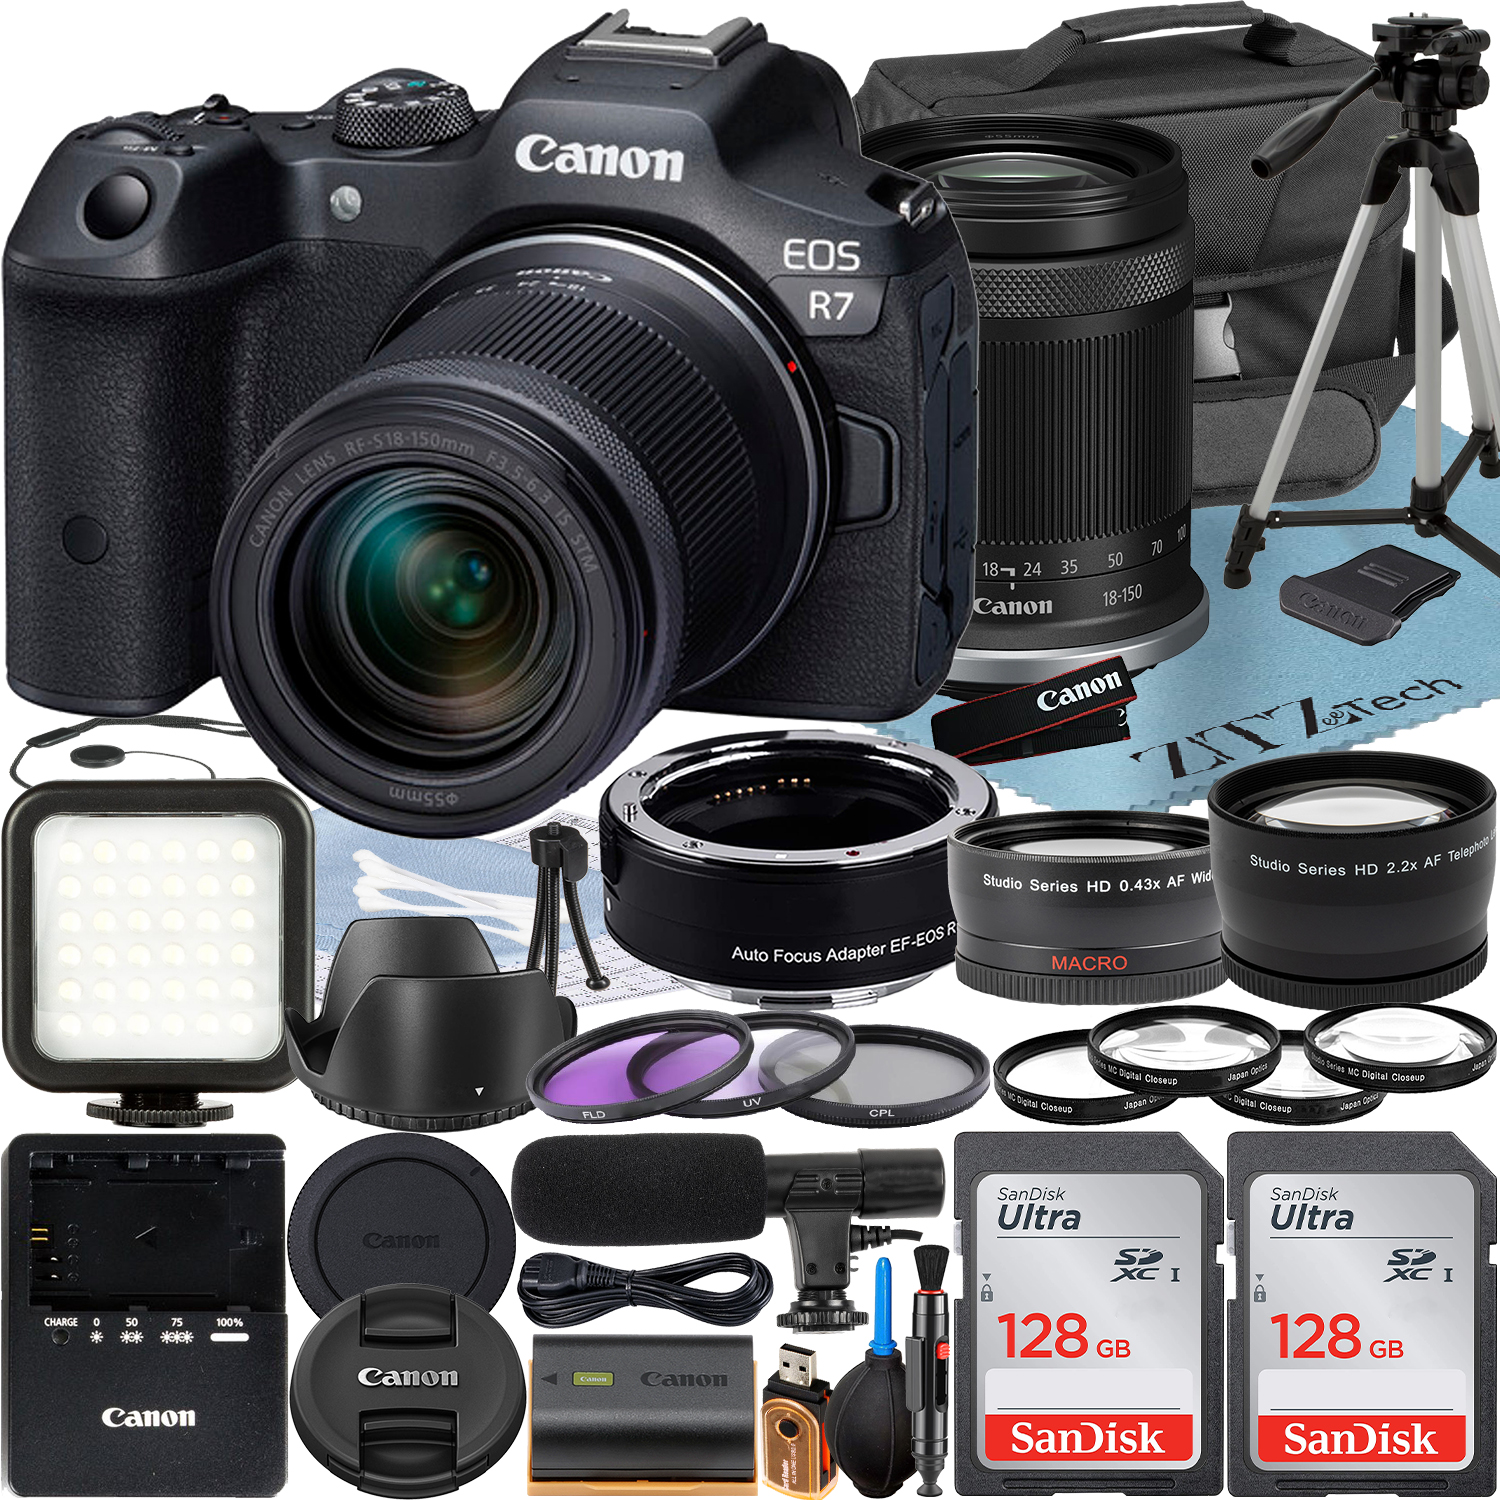 Canon EOS R7 Mirrorless Camera with RF-S 18-150mm Lens + Mount Adapter + 2 Pack SanDisk 128GB Memory Card + Case + ZeeTech Accessory